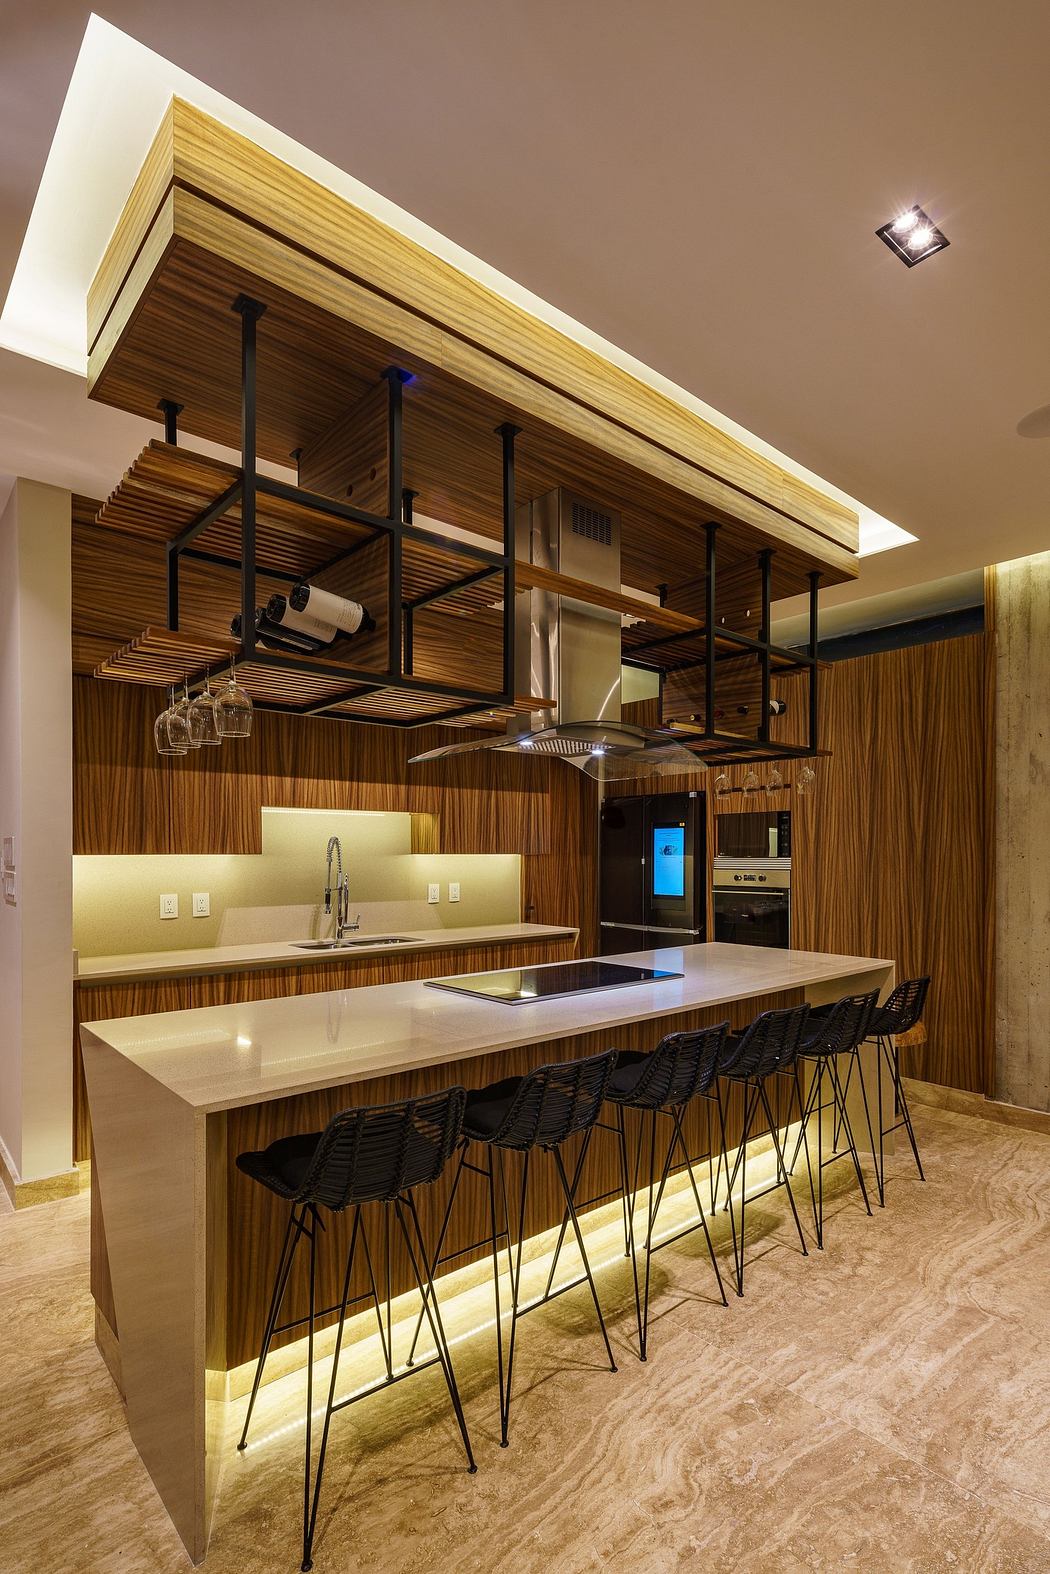 Modern kitchen with wood paneling, hanging pots, island, and under-counter lighting